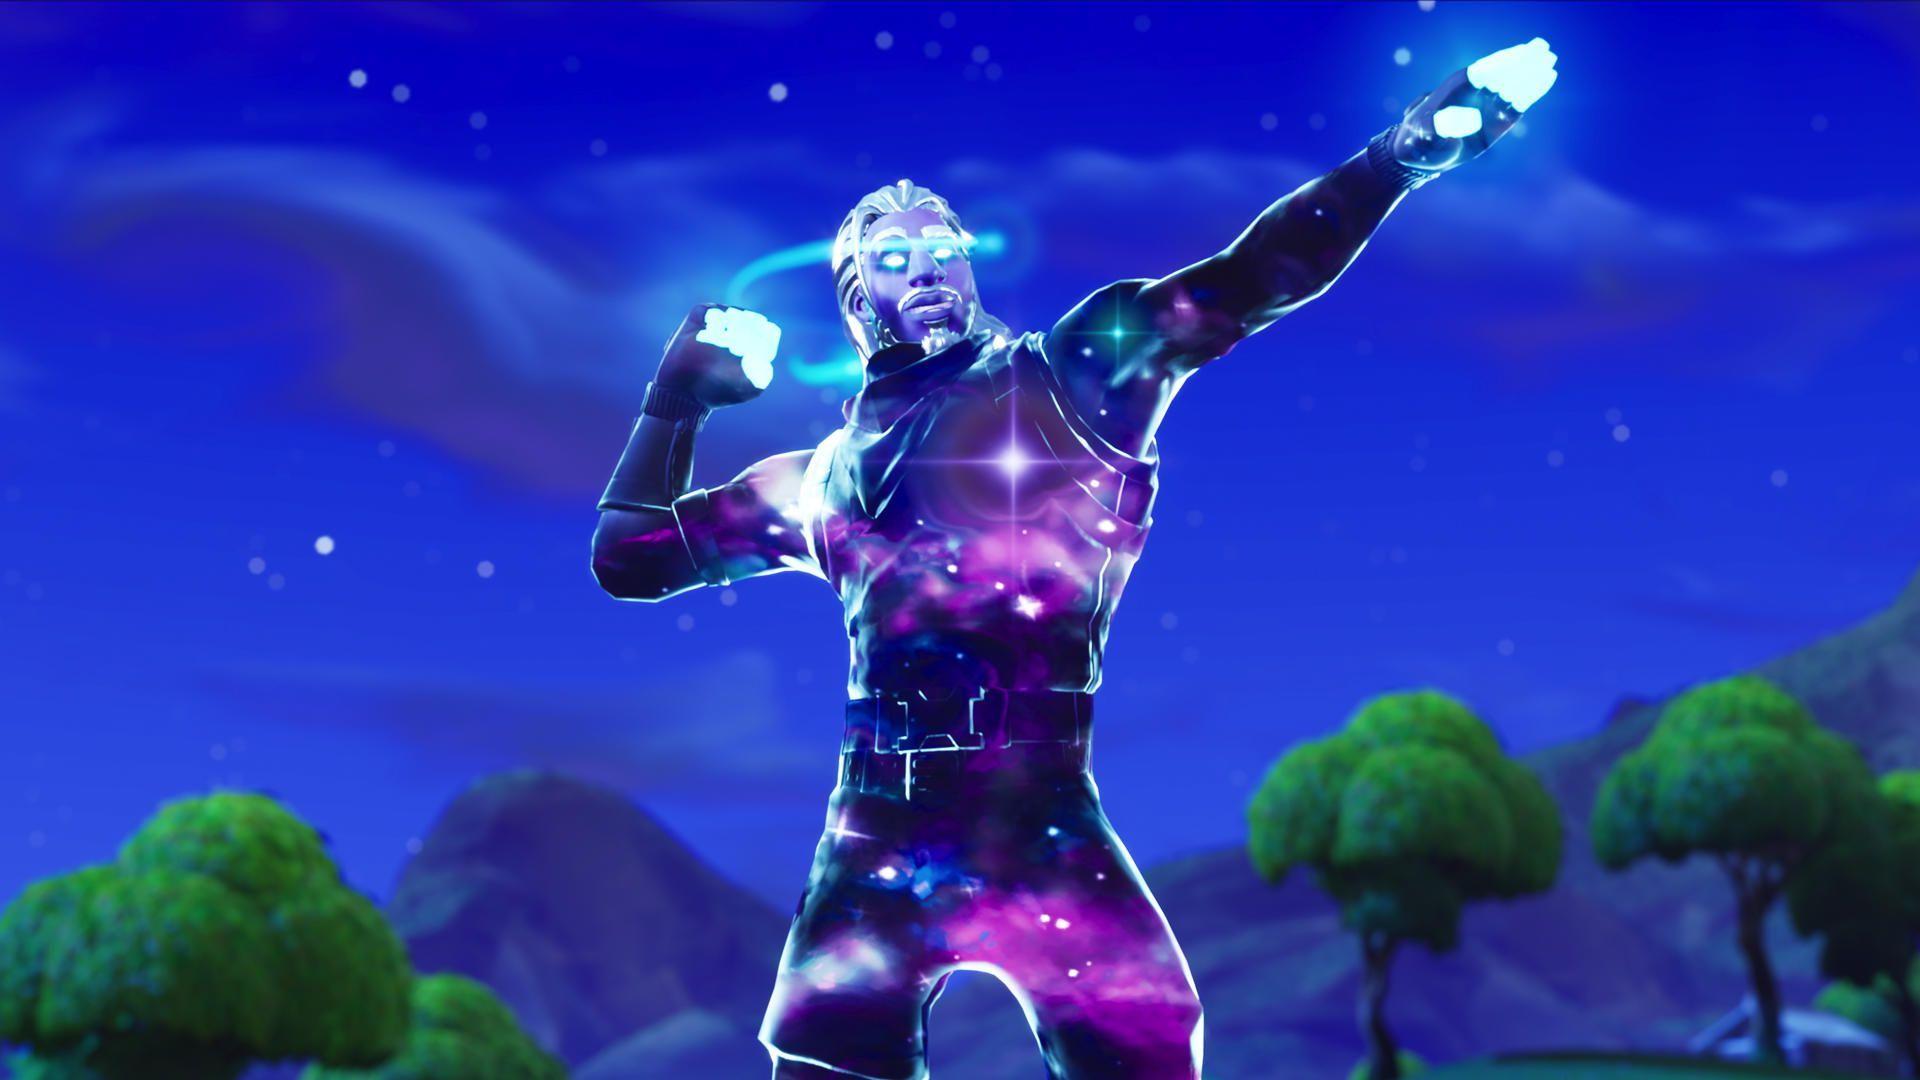 Fortnite Galaxy Skin First Look and gameplay